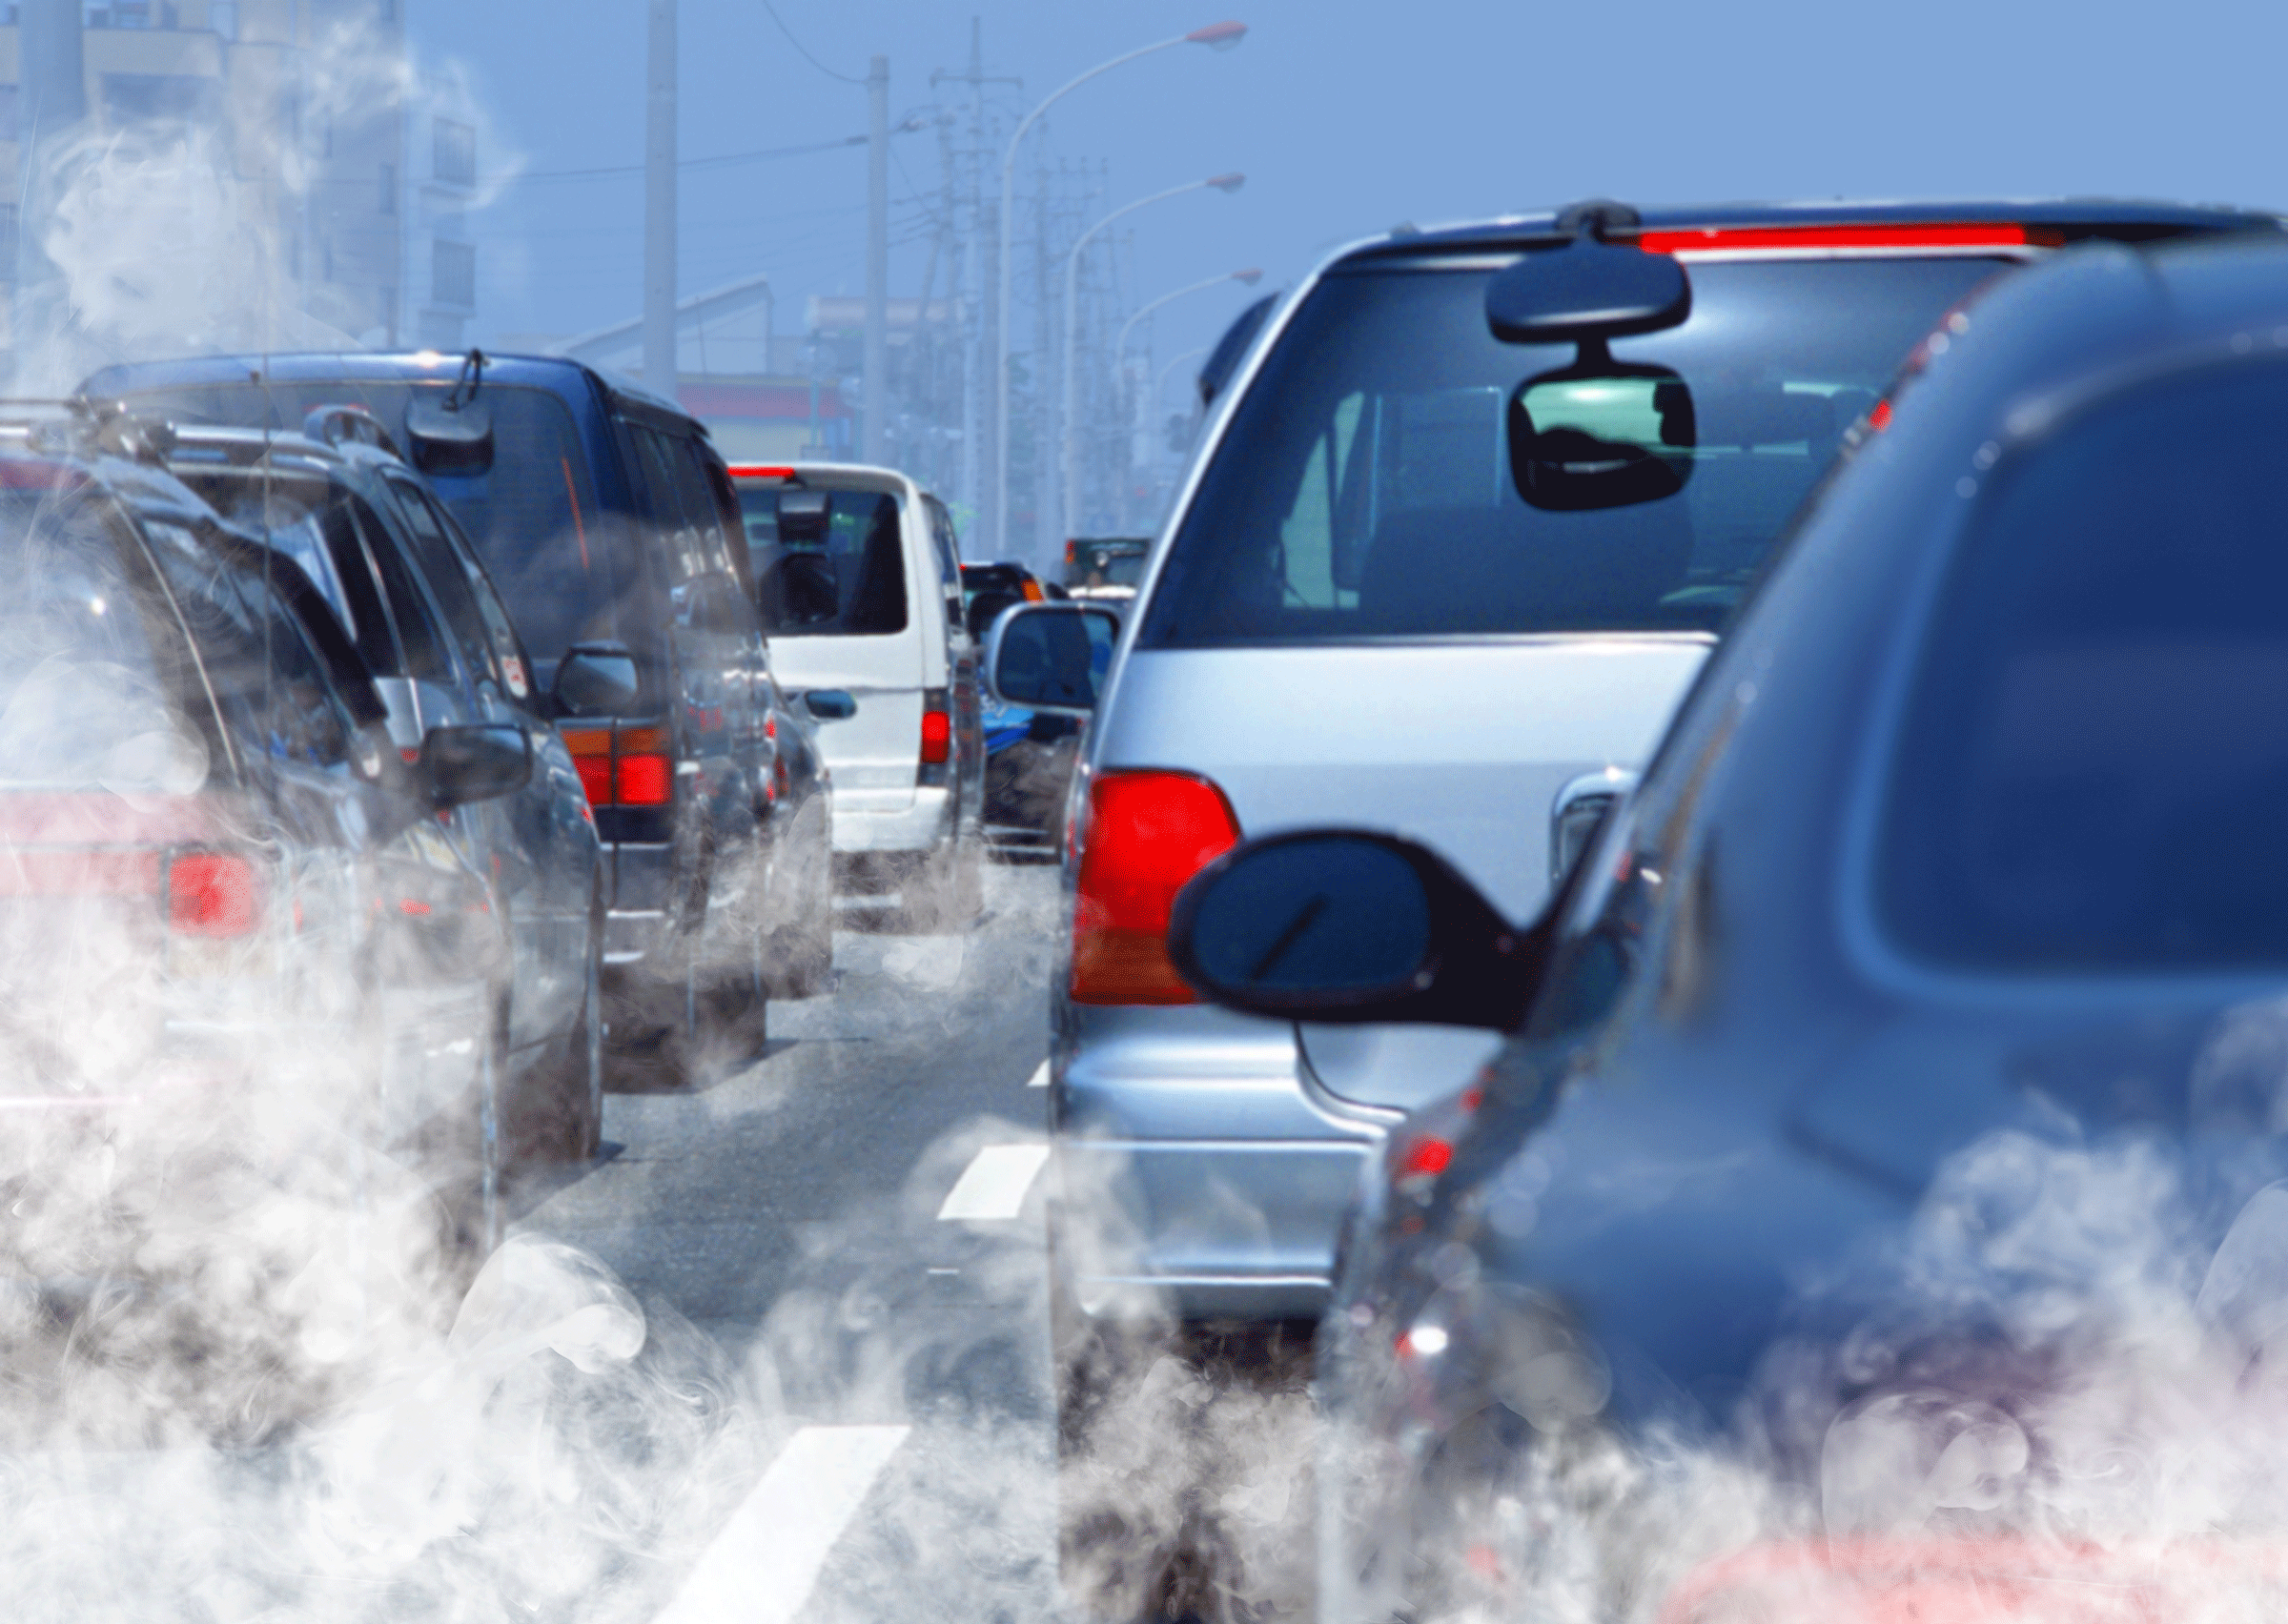 vehicle exhaust pollution